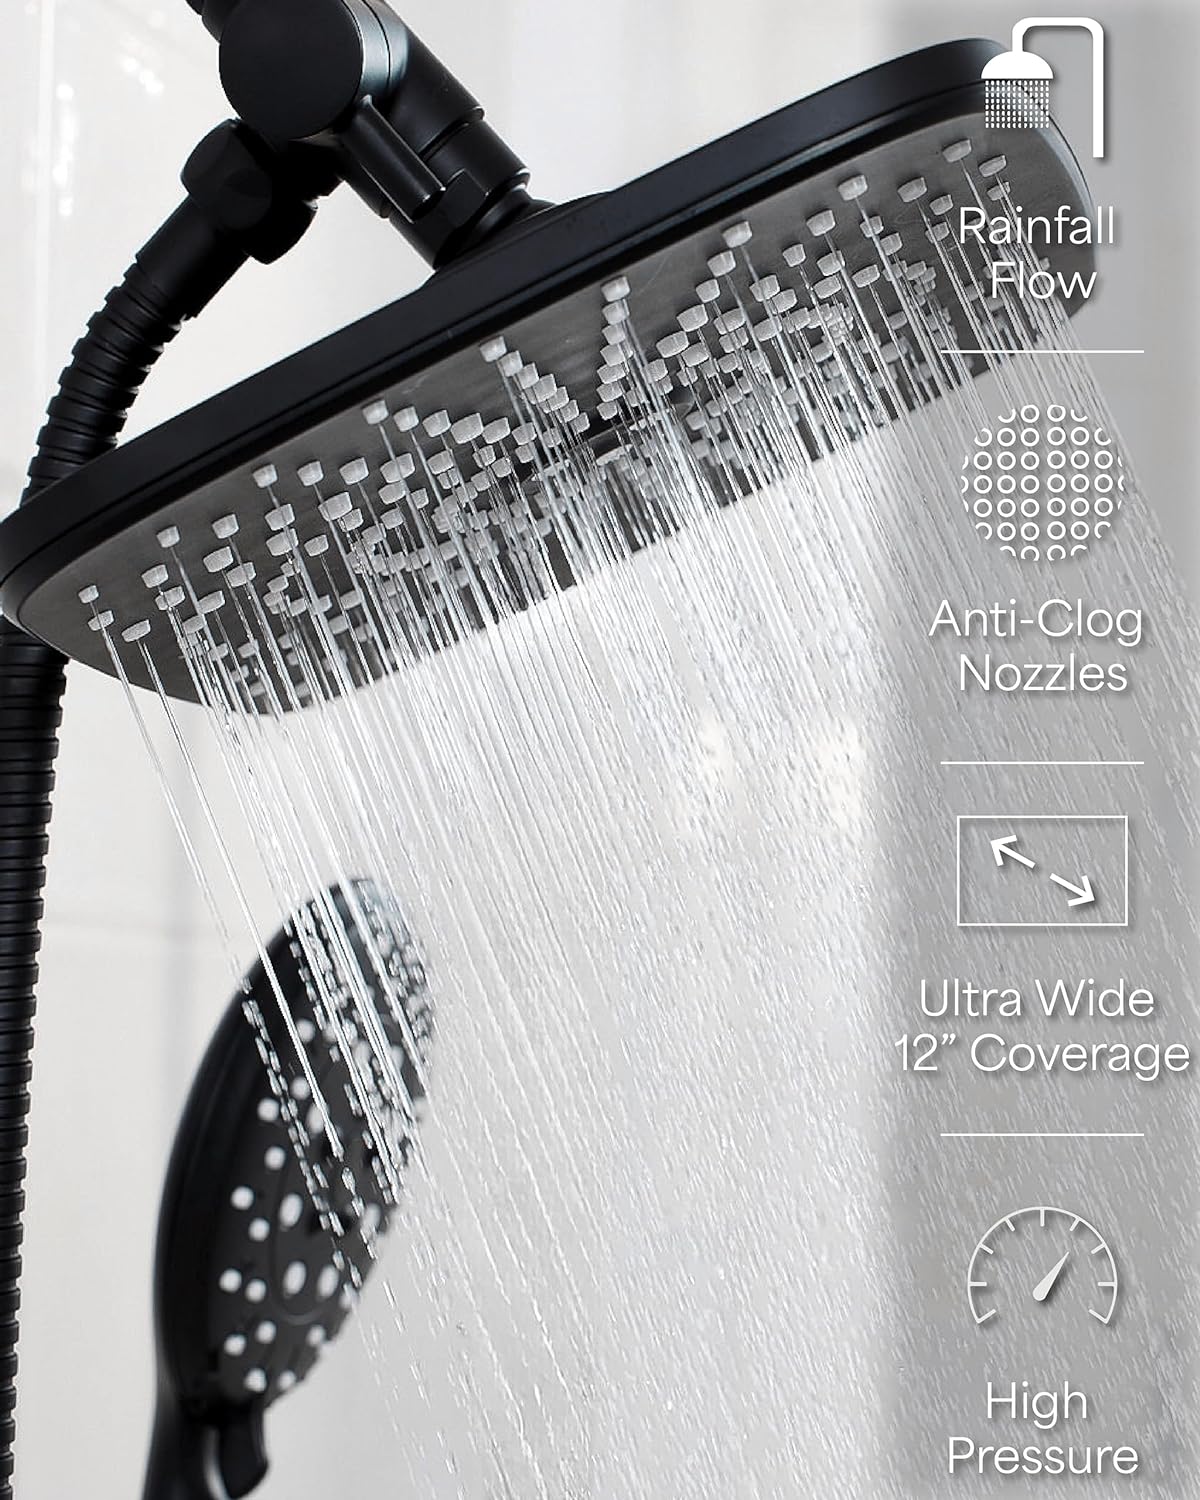 Veken 12 Inch High Pressure Rain Shower Head -Shower Heads with 5 Modes Handheld Spray Combo- Wide RainFall shower with 70" Hose - Adjustable Dual Showerhead with Anti-Clog Nozzles- Matte Black - aborderproducts